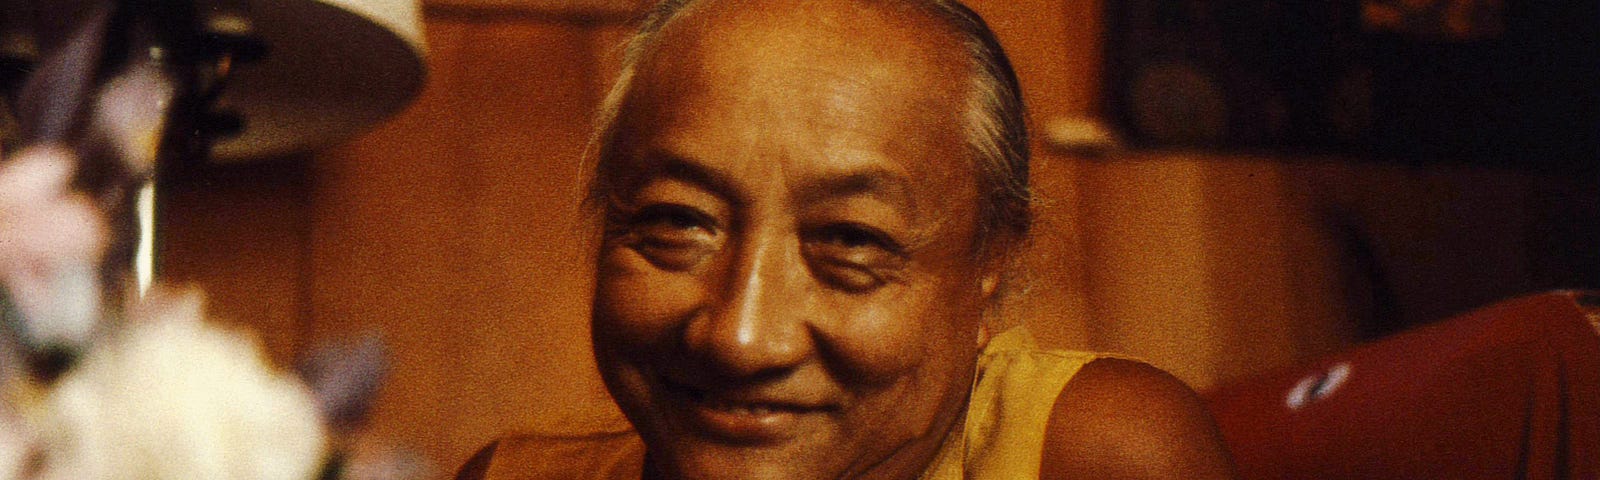 His Holiness Dilgo Khyentse Rinpoche’s broad smile, Seattle, Washington, USA 1976. In Buddhism the relation between acceptance, control and resistance is well studied.